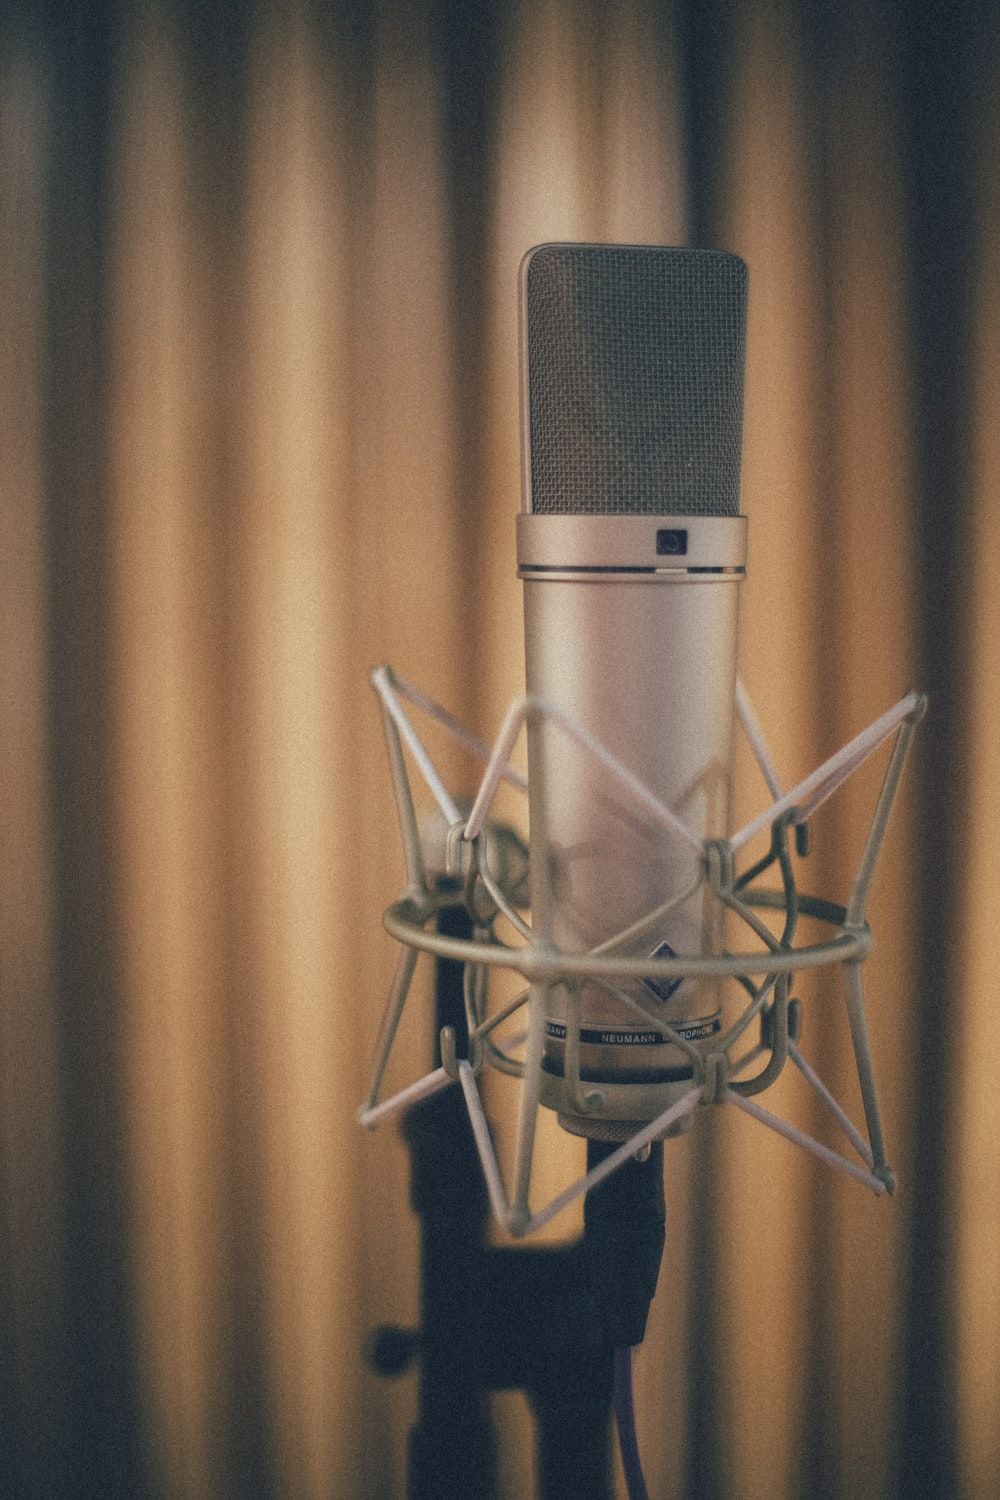 Neumann Microphone Picture. Download Free Image